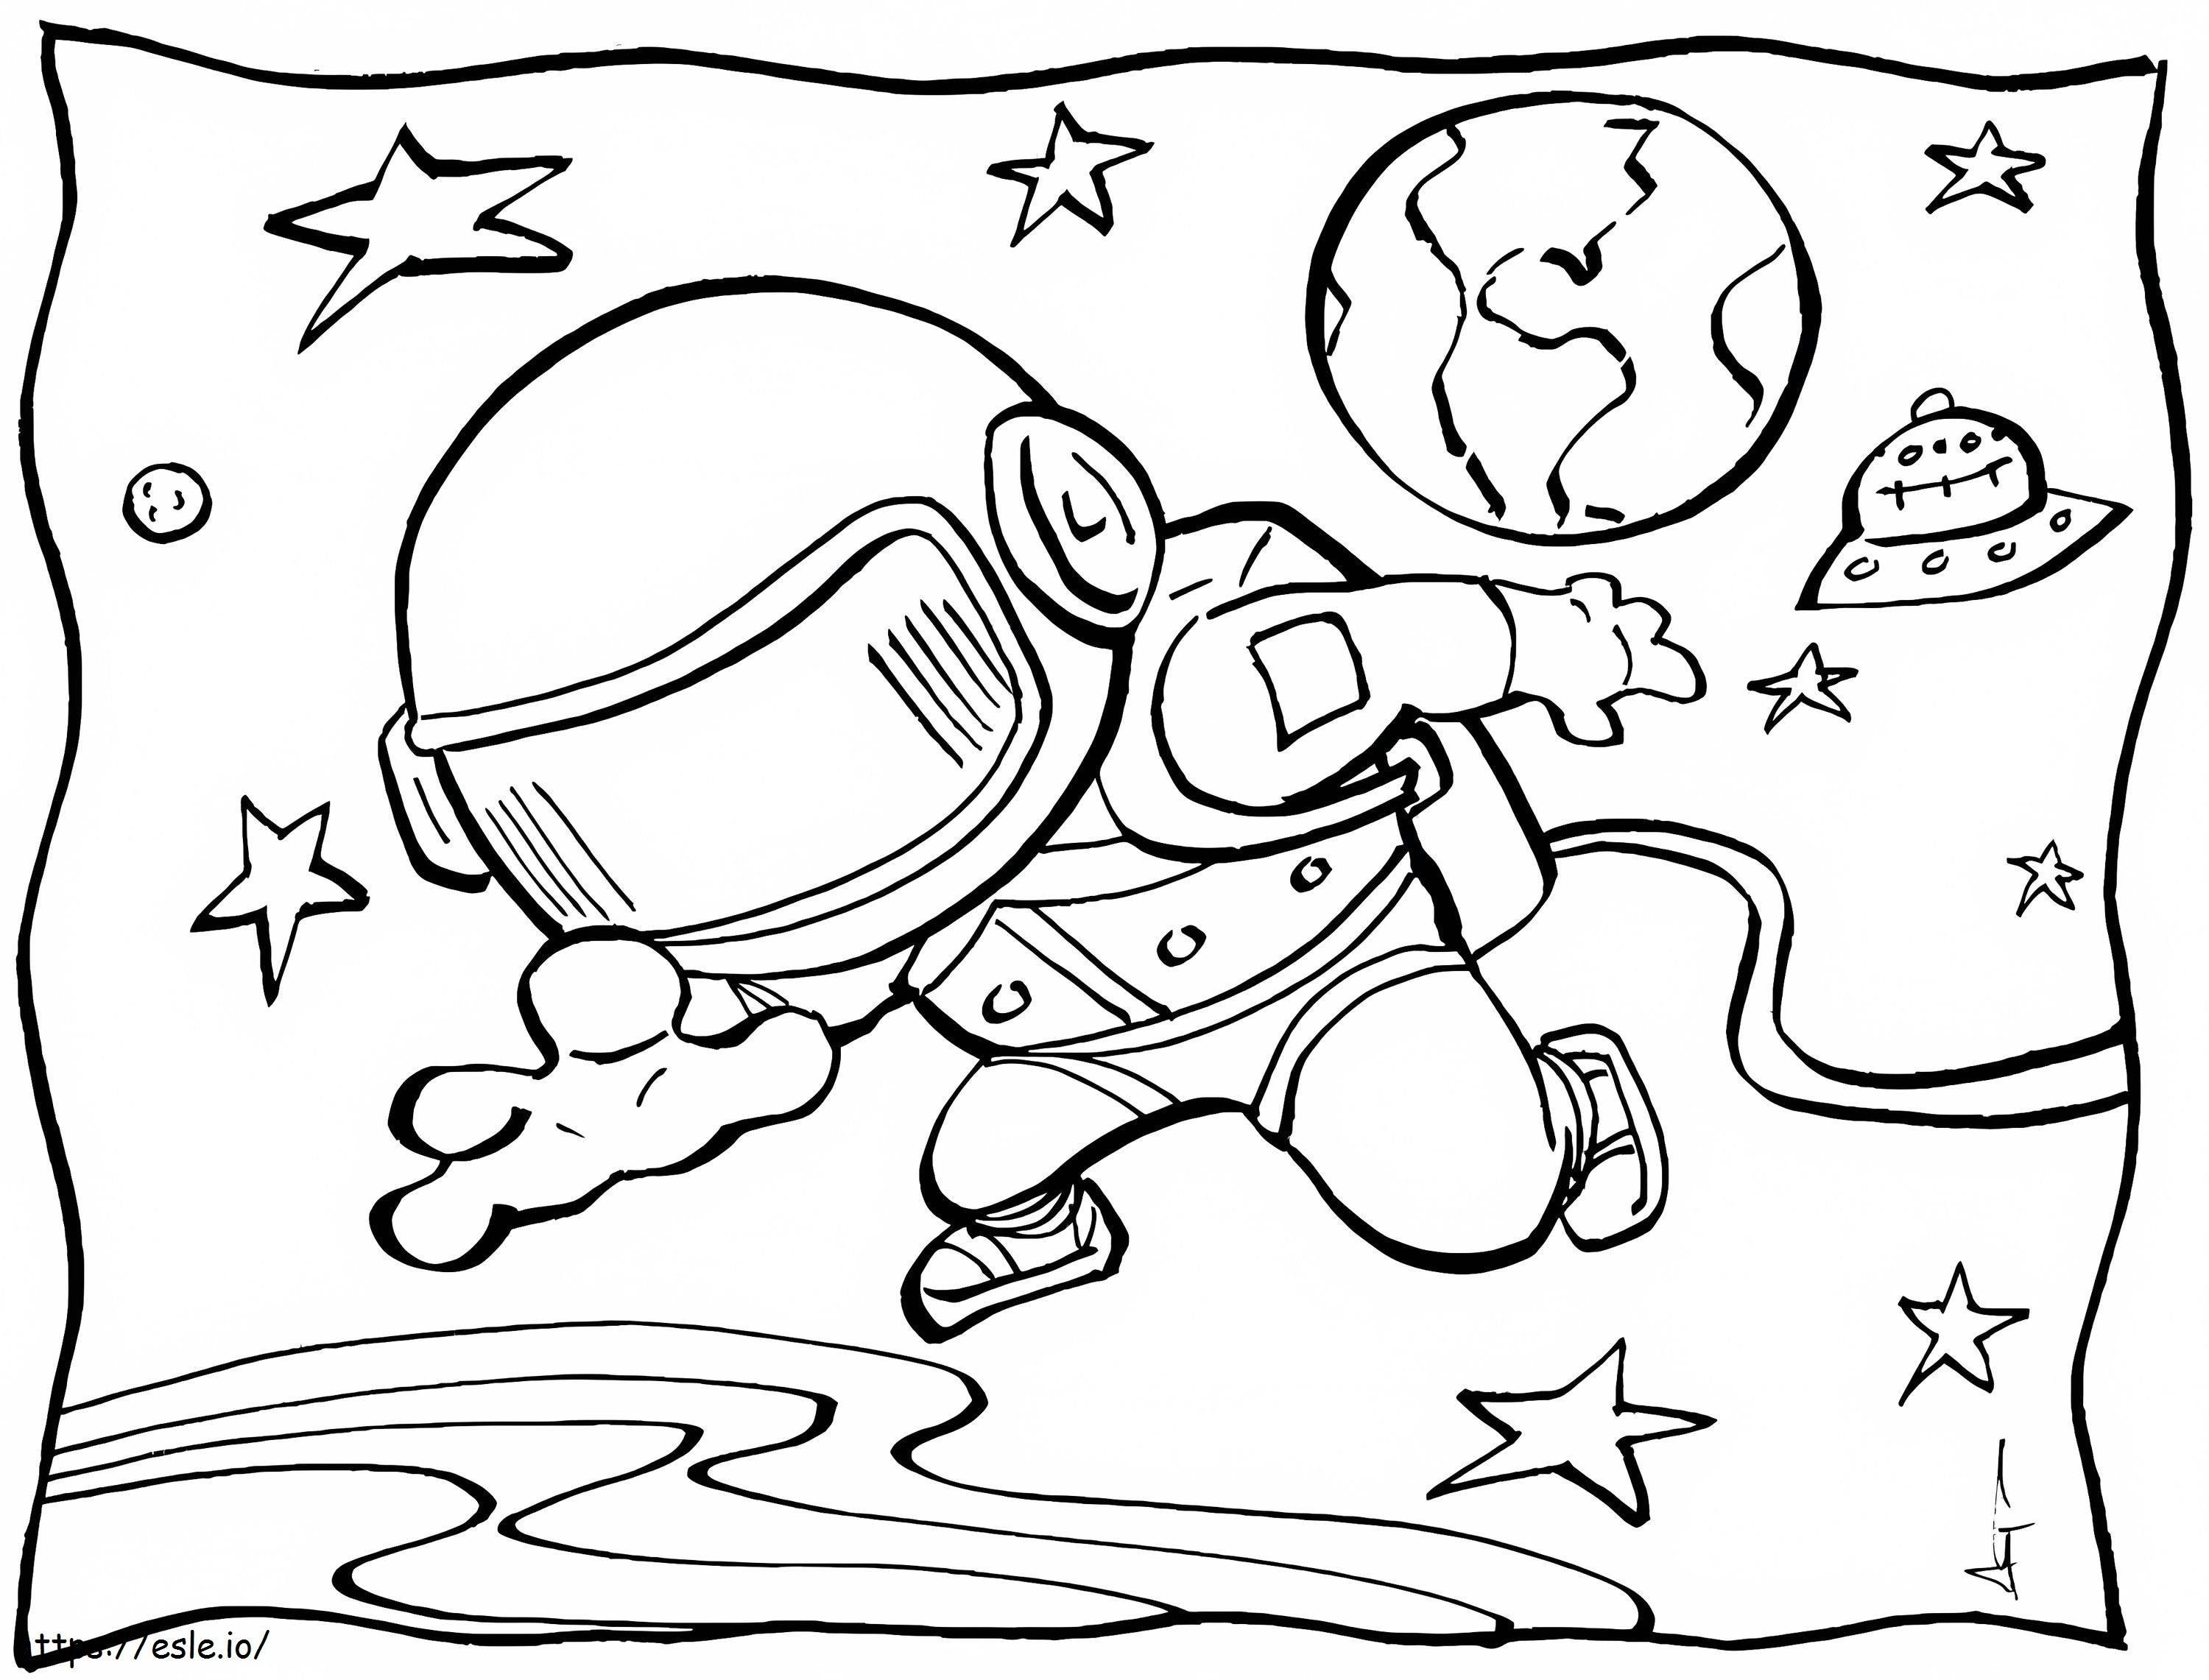 In Space coloring page